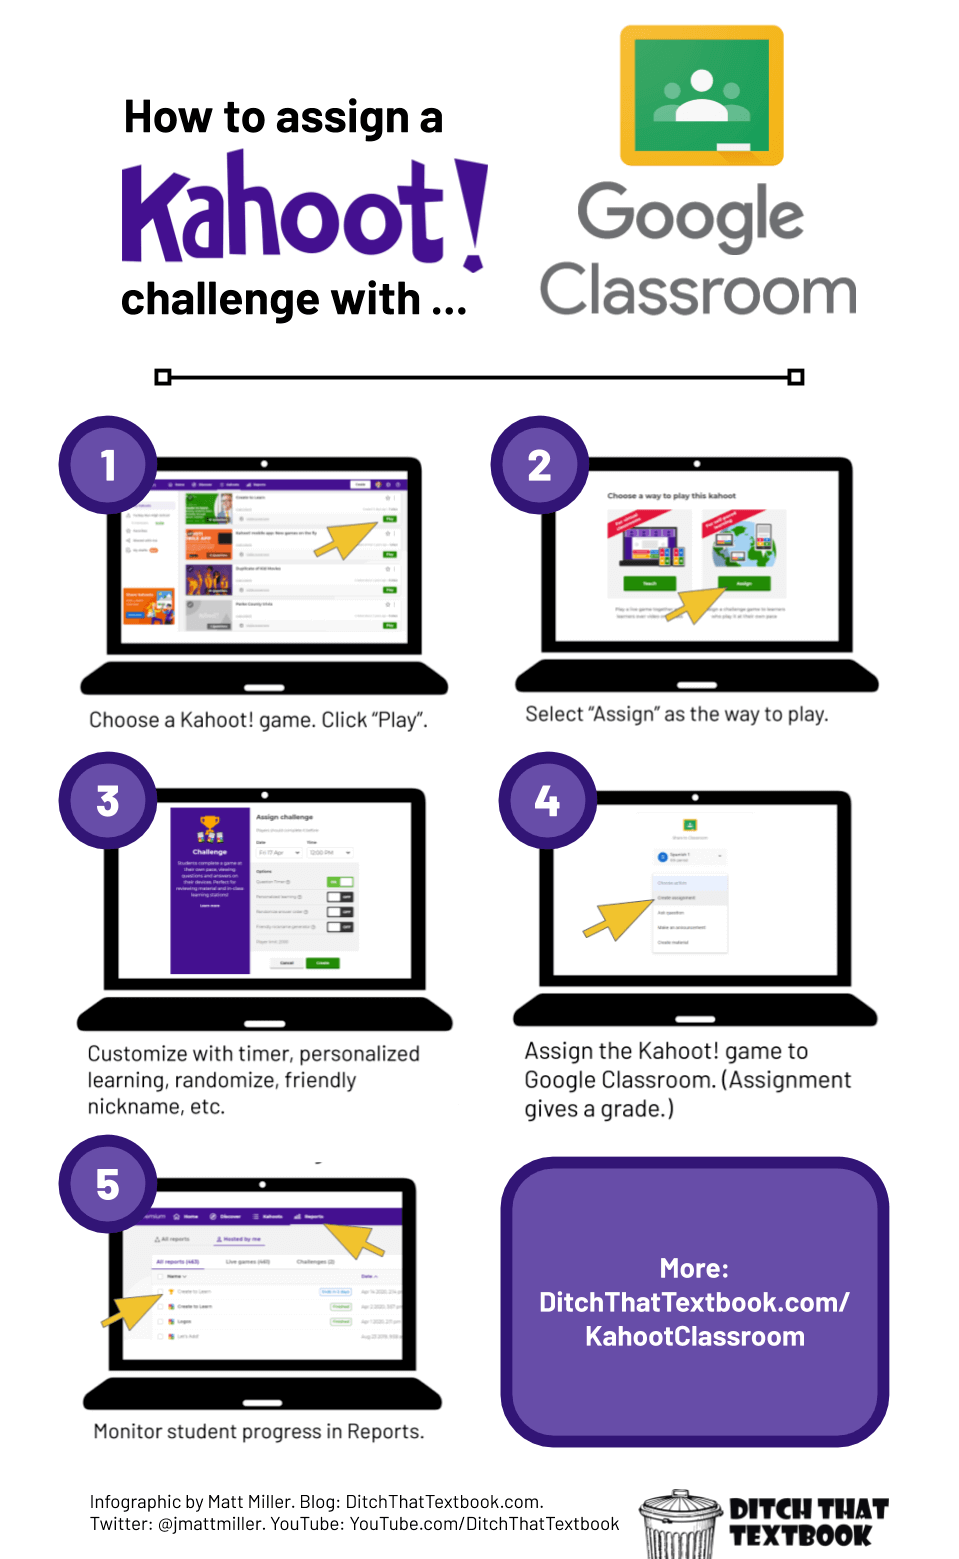 How to assign a Kahoot! Challenge with Google Classroom